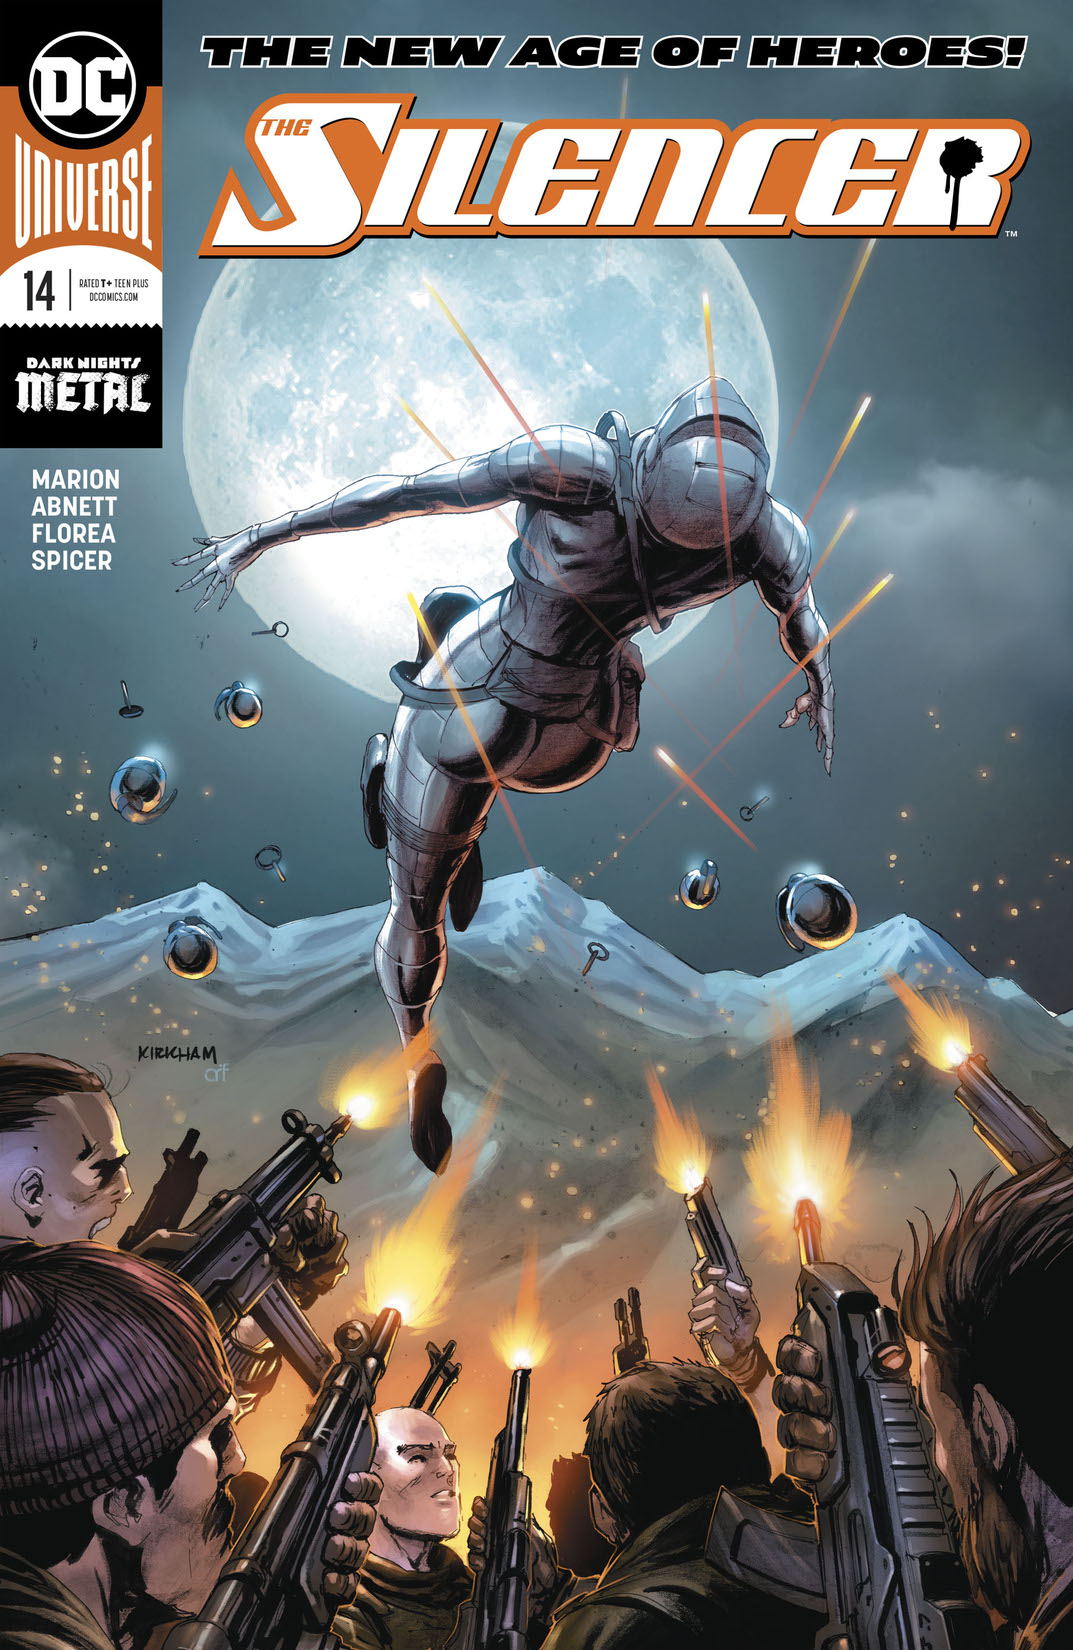 The Silencer #14 preview images